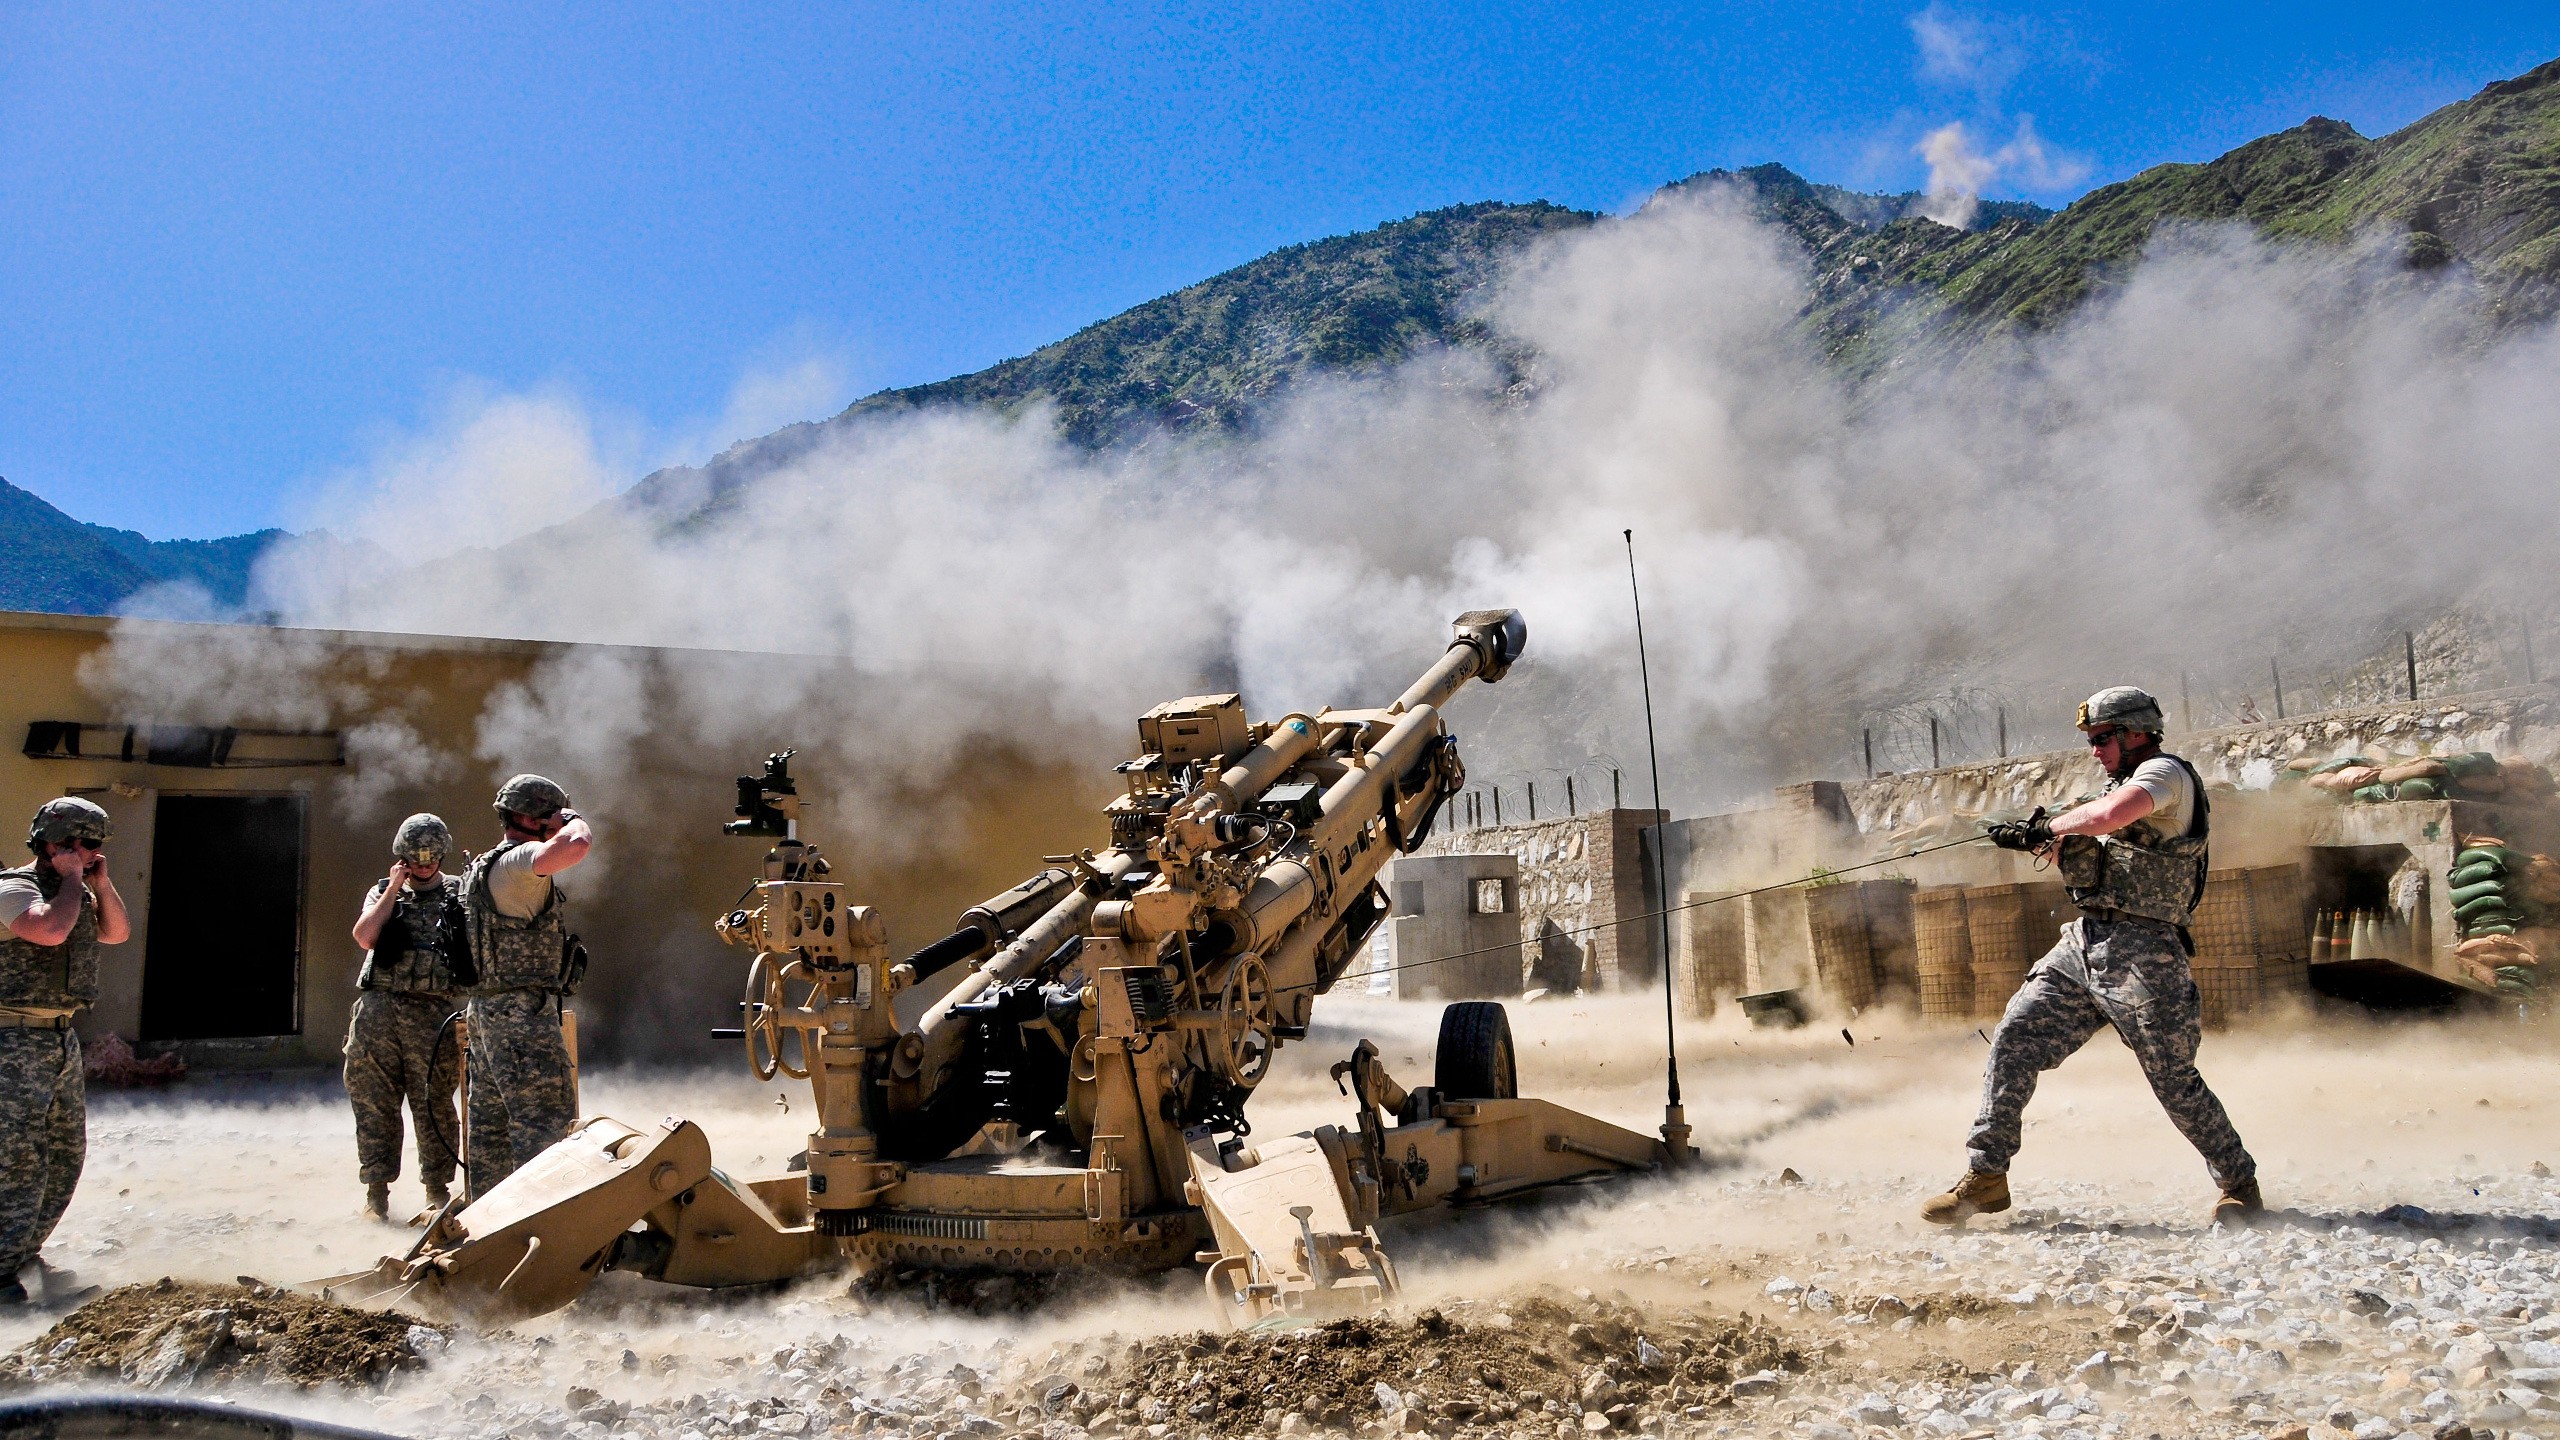 General 2560x1440 military M777 howitzer United States Army artillery weapon soldier